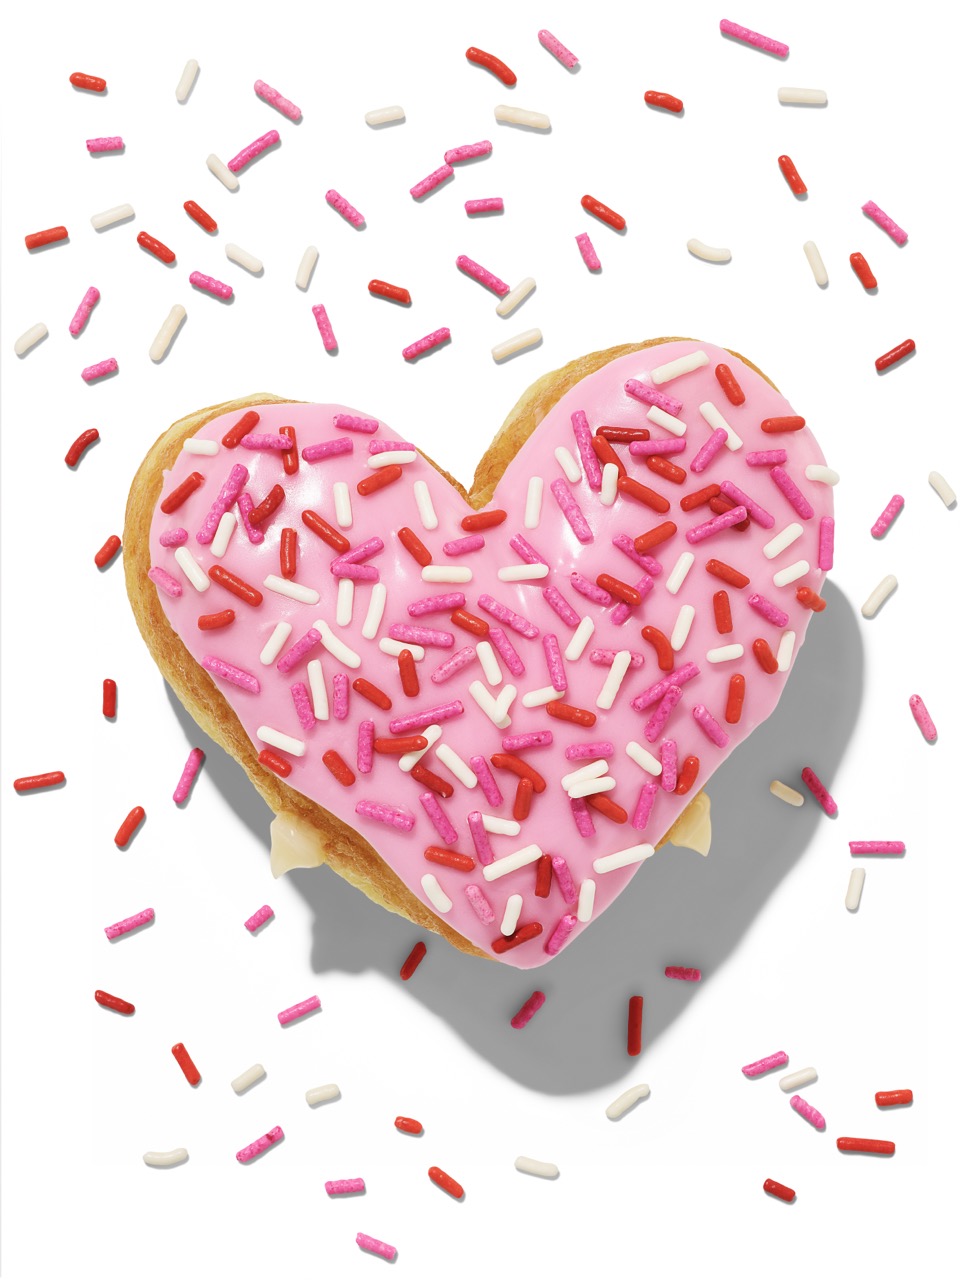 Dunkin' Valentine's Day heart shaped donuts